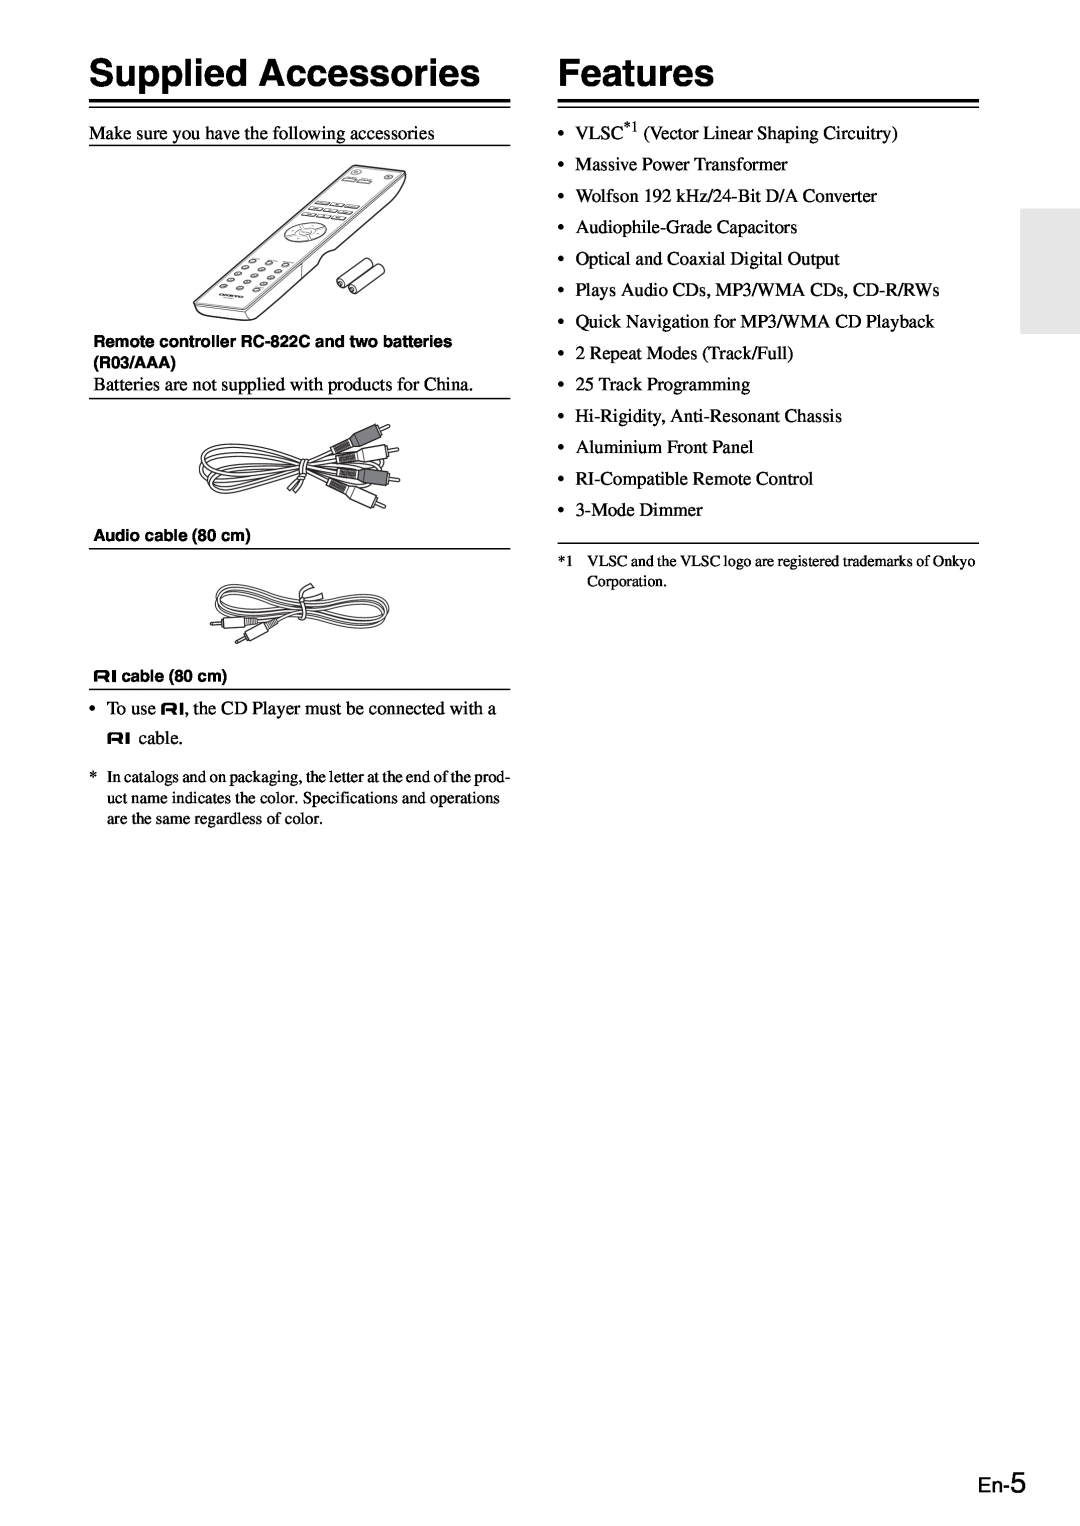 Onkyo C-7030 instruction manual Supplied Accessories, Features, En-5 